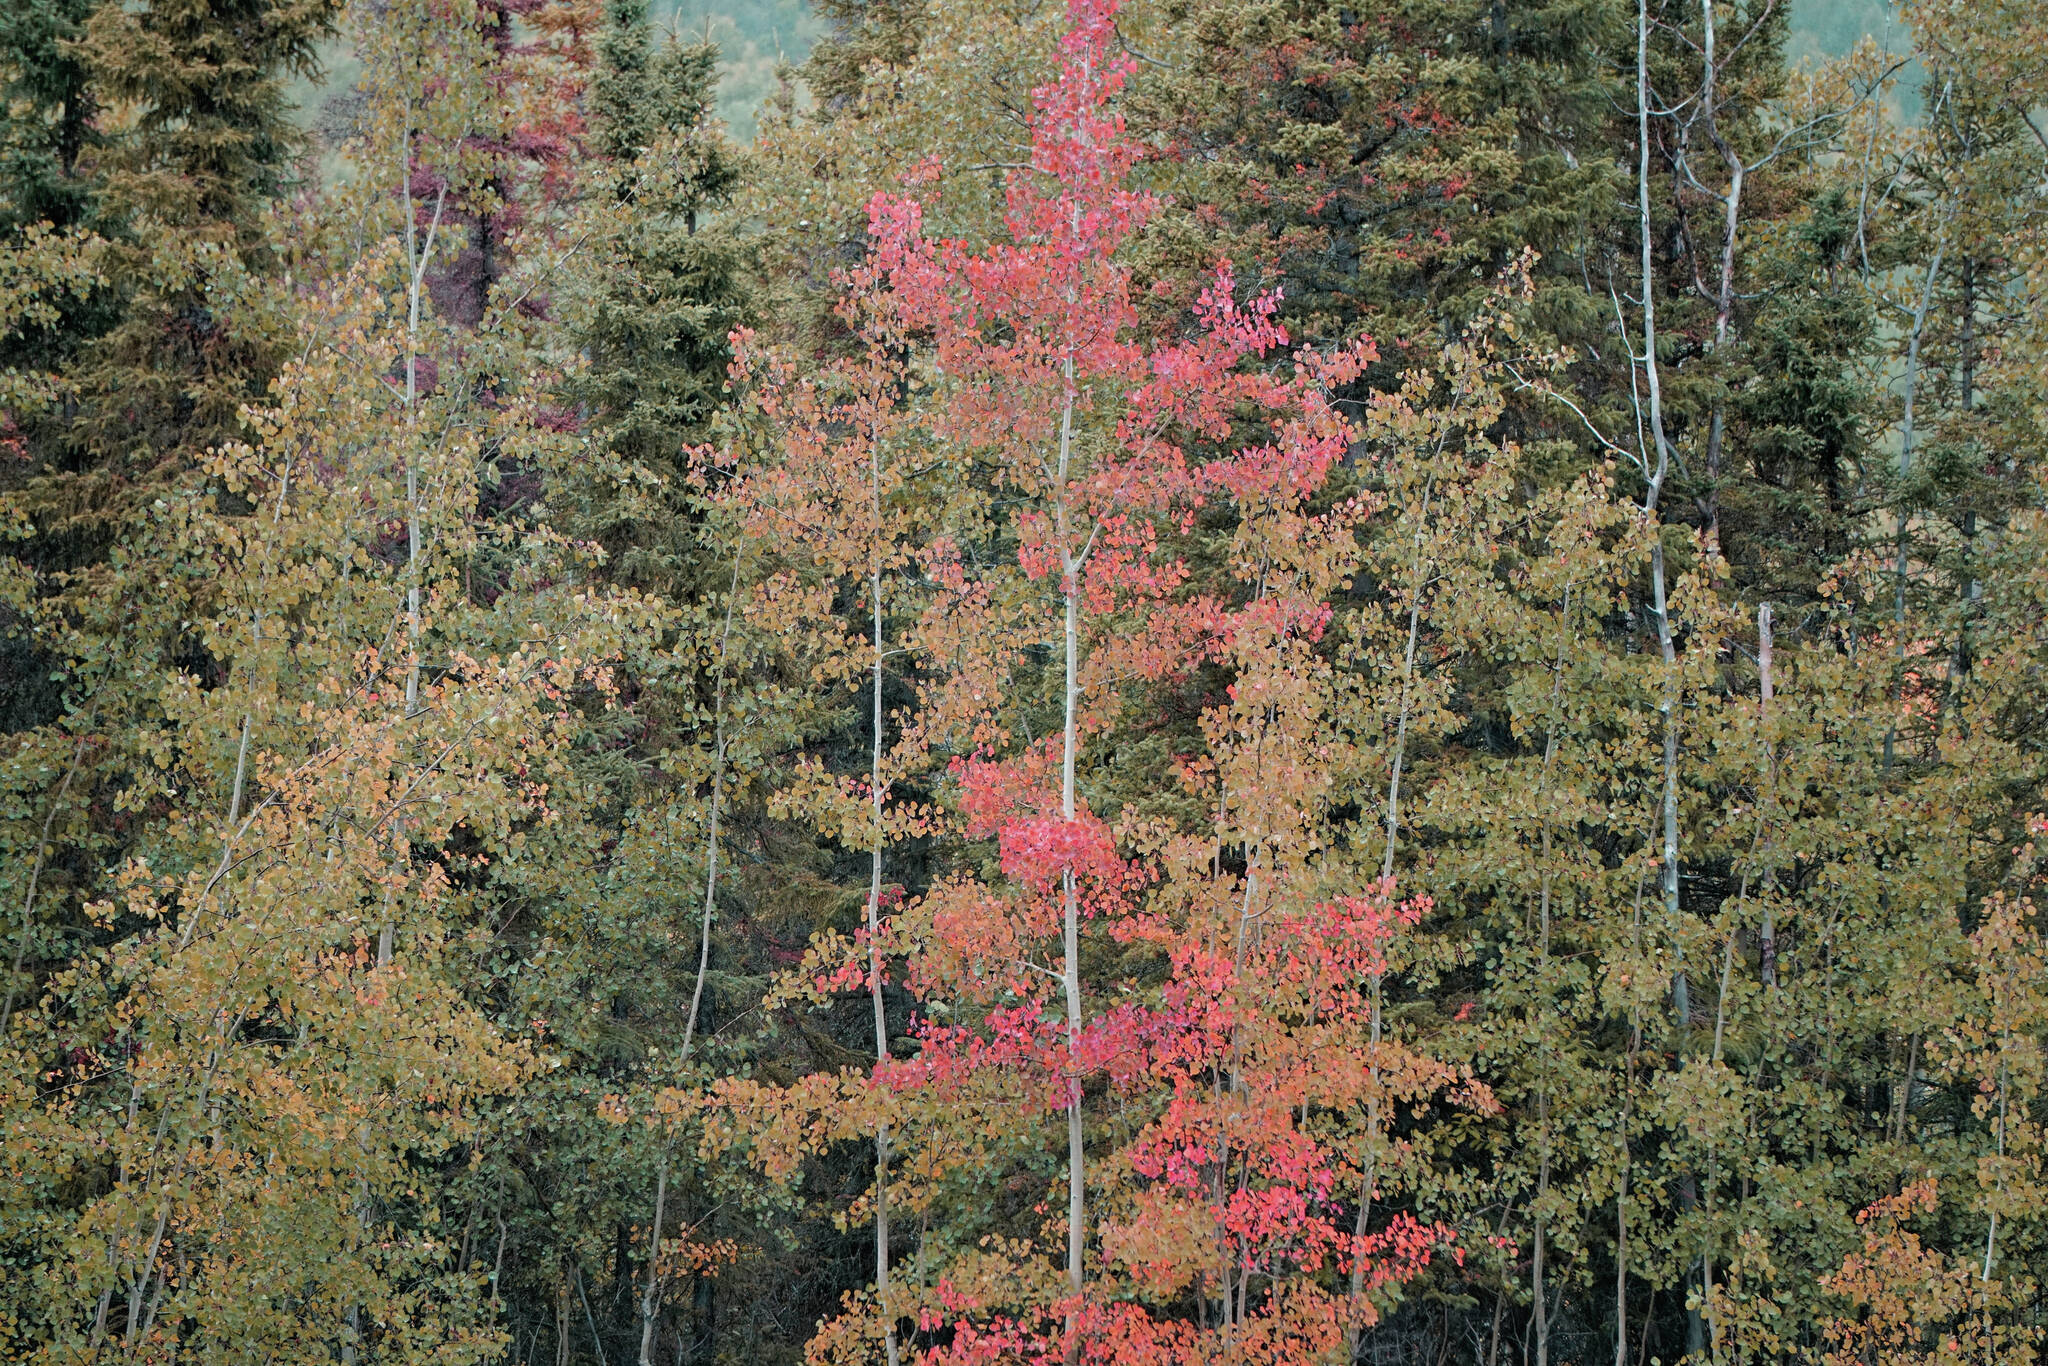 Aspen trees offer a spot of red on Saturday, Sept. 11, 2021, at the Hidden Lake Campground in the Kenai National Wildlife Refuge near Sterling, Alaska. (Photo by Michael Armstrong/Homer News)